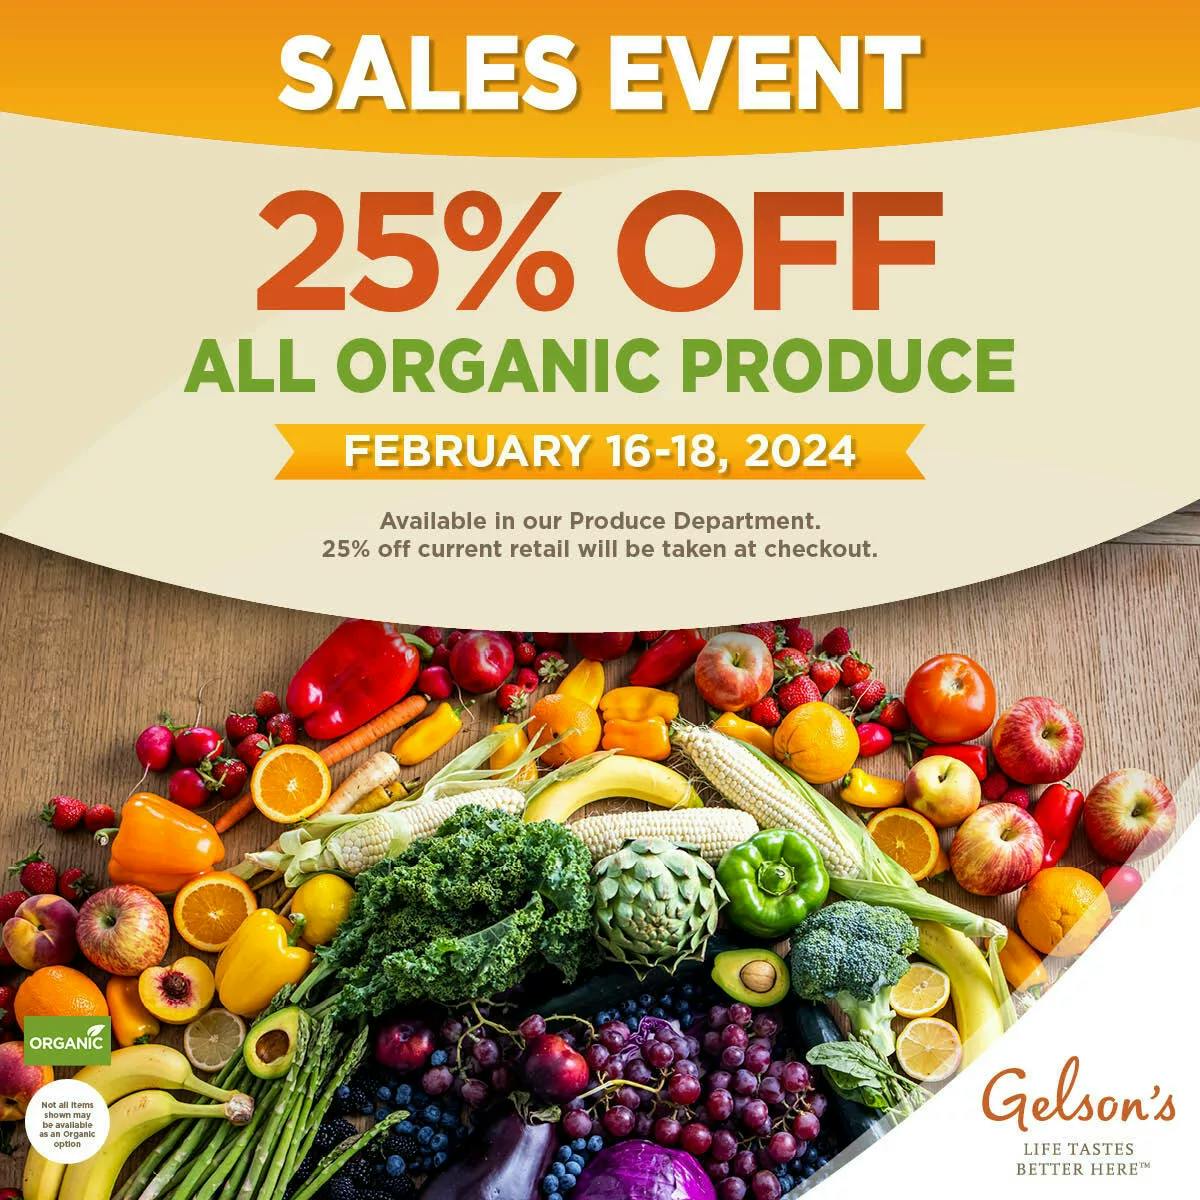 Discounted organic produce options